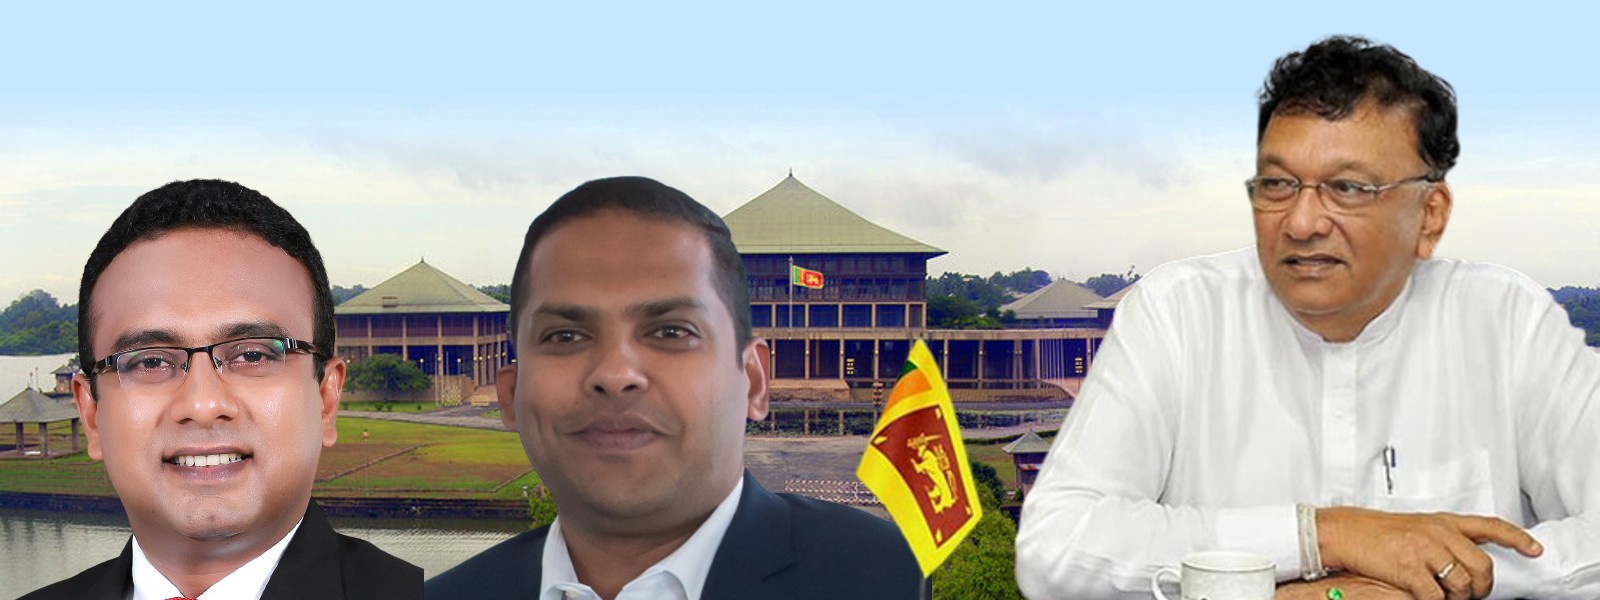 Harin & Manusha to face disciplinary action for obtaining ministerial positions